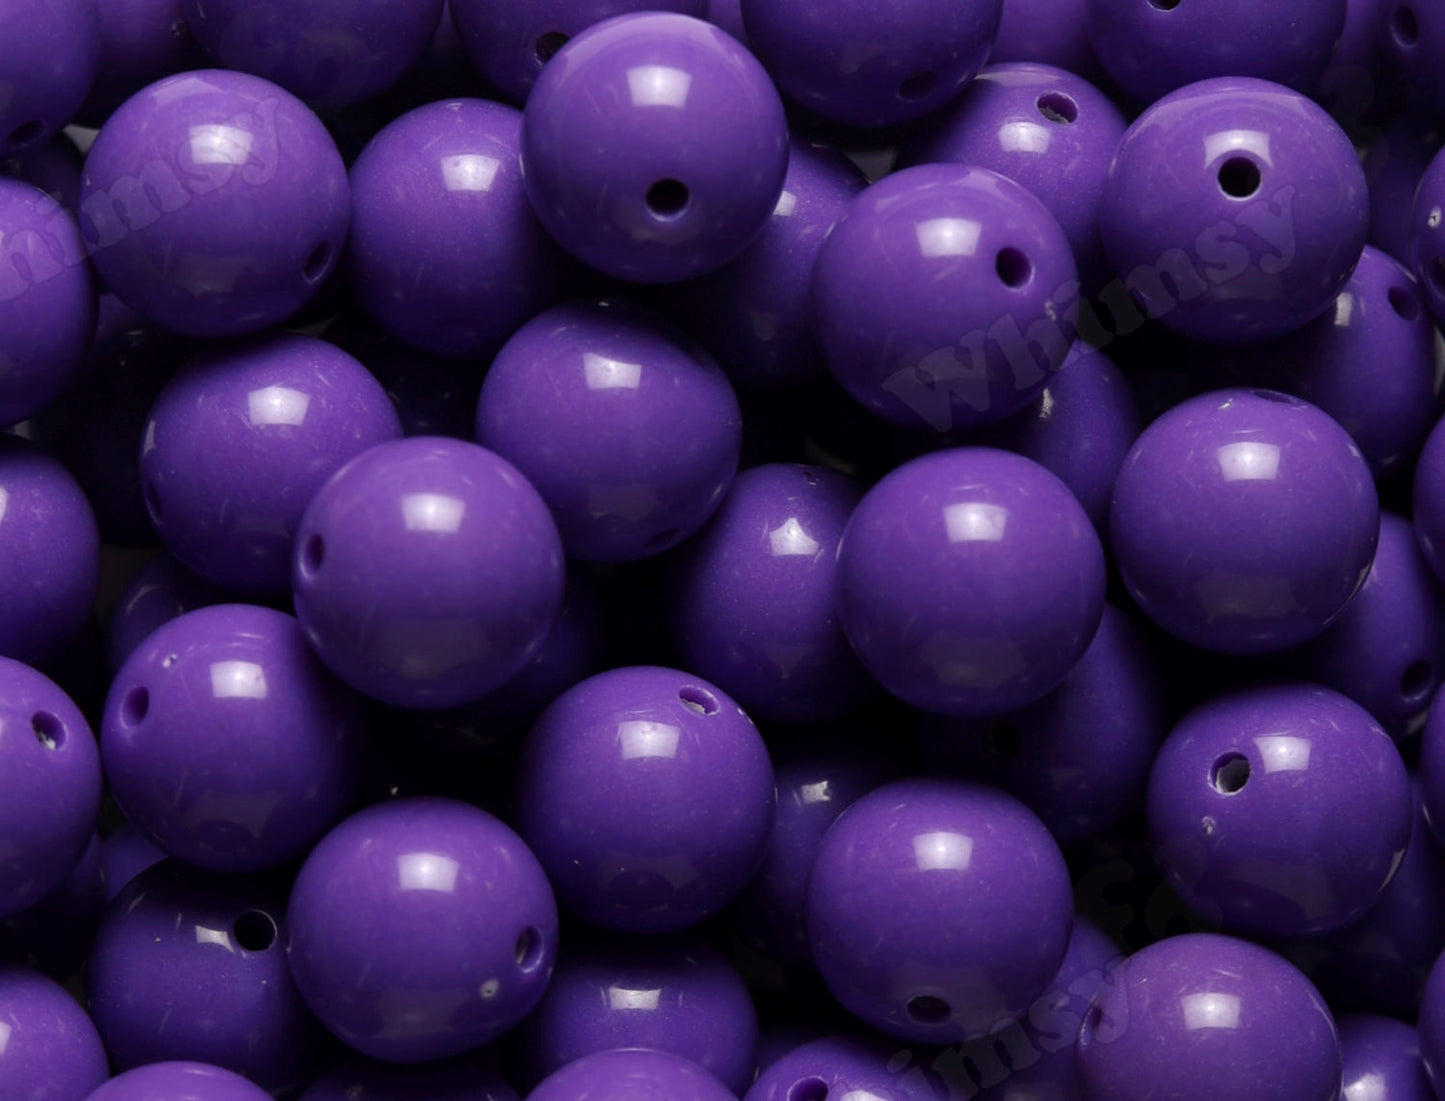 Purple 20mm Solid Bubblegum Beads for DIY Jewelry by WhimsyandPOP